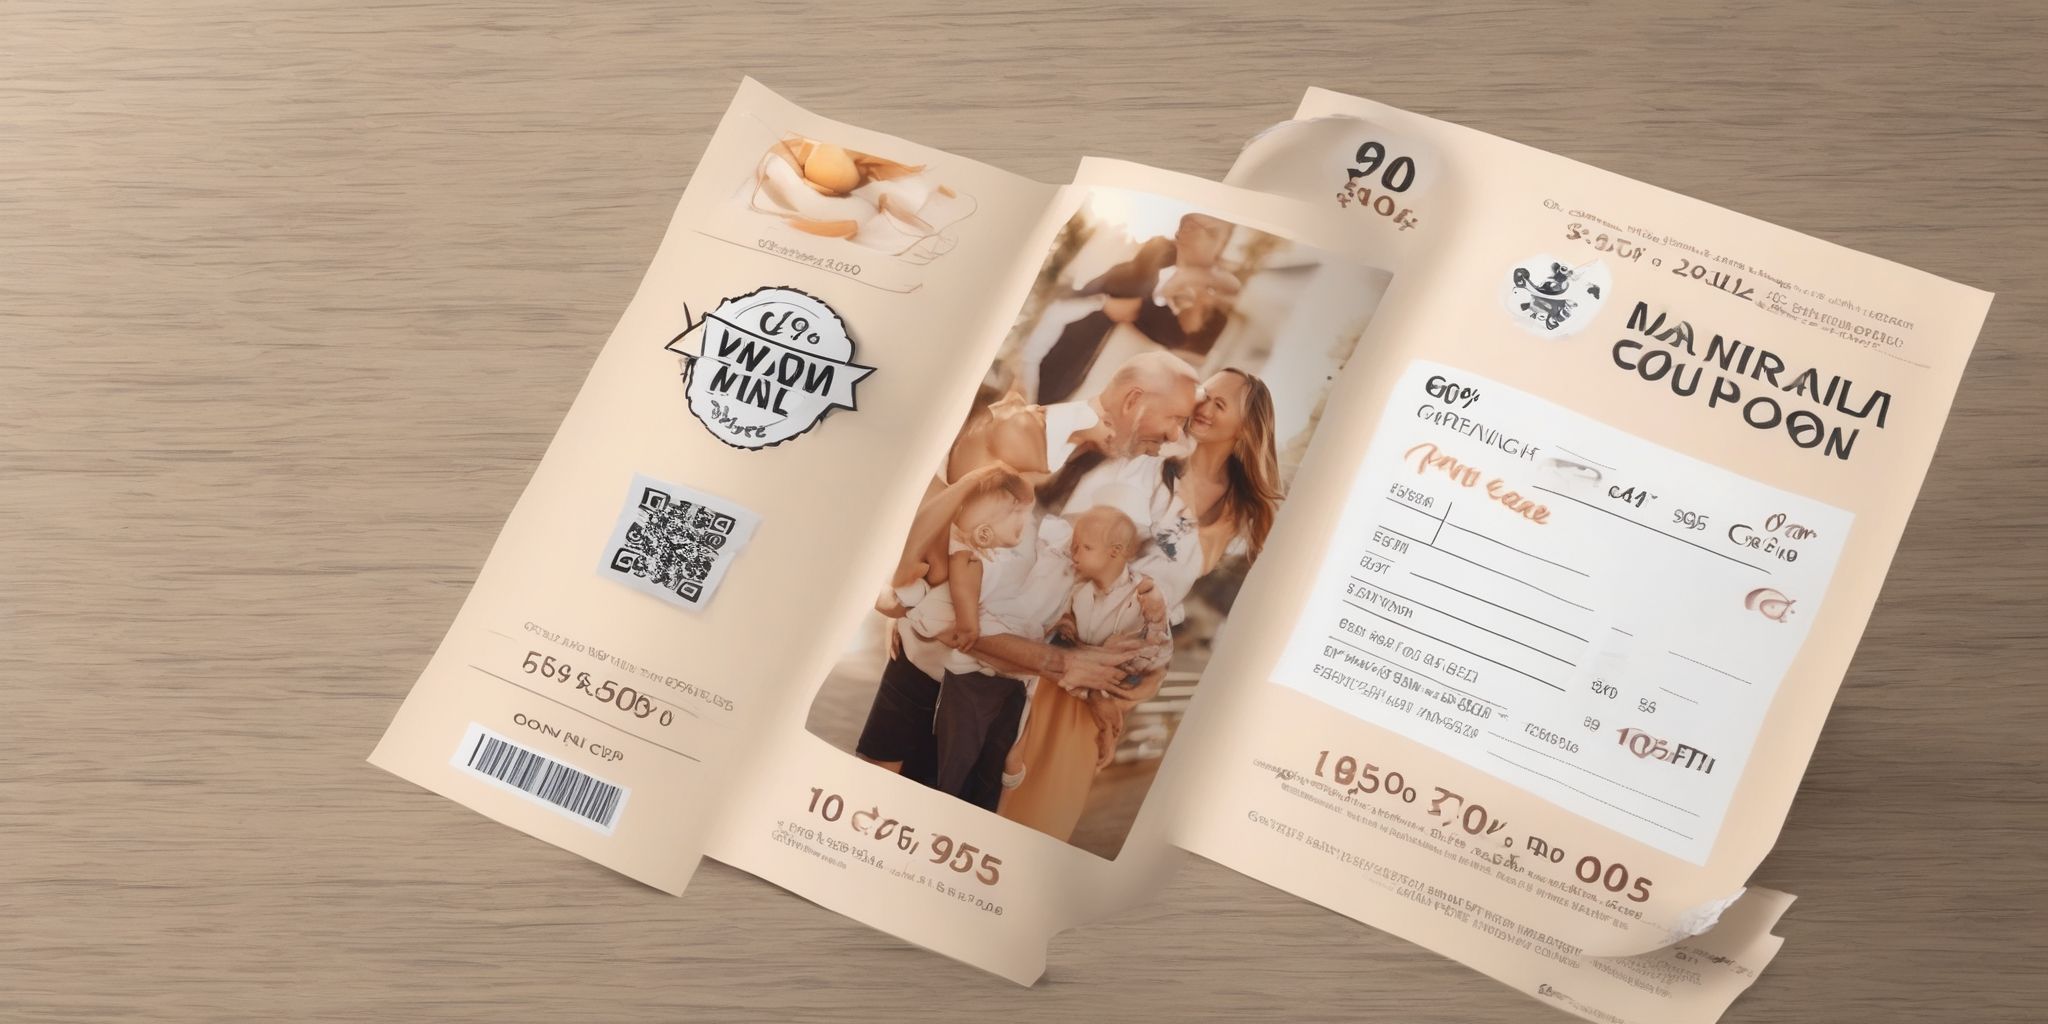 Coupon book  in realistic, photographic style